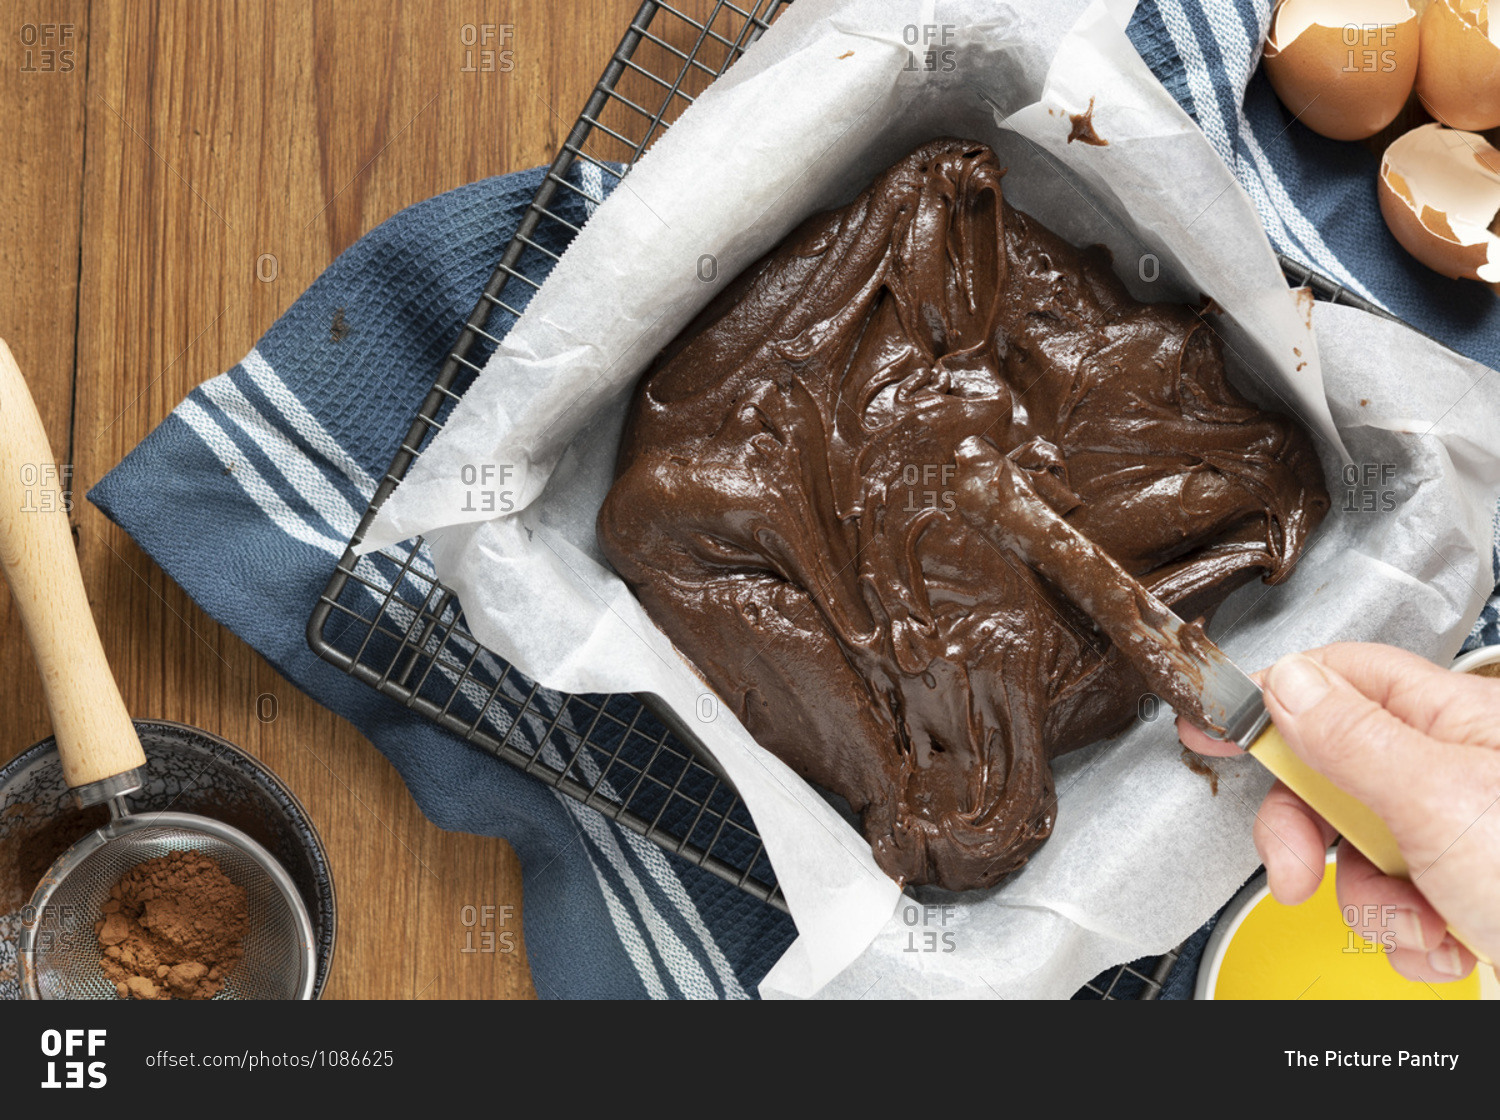 Chocolate cake batter spread into a baking pan with a knife.